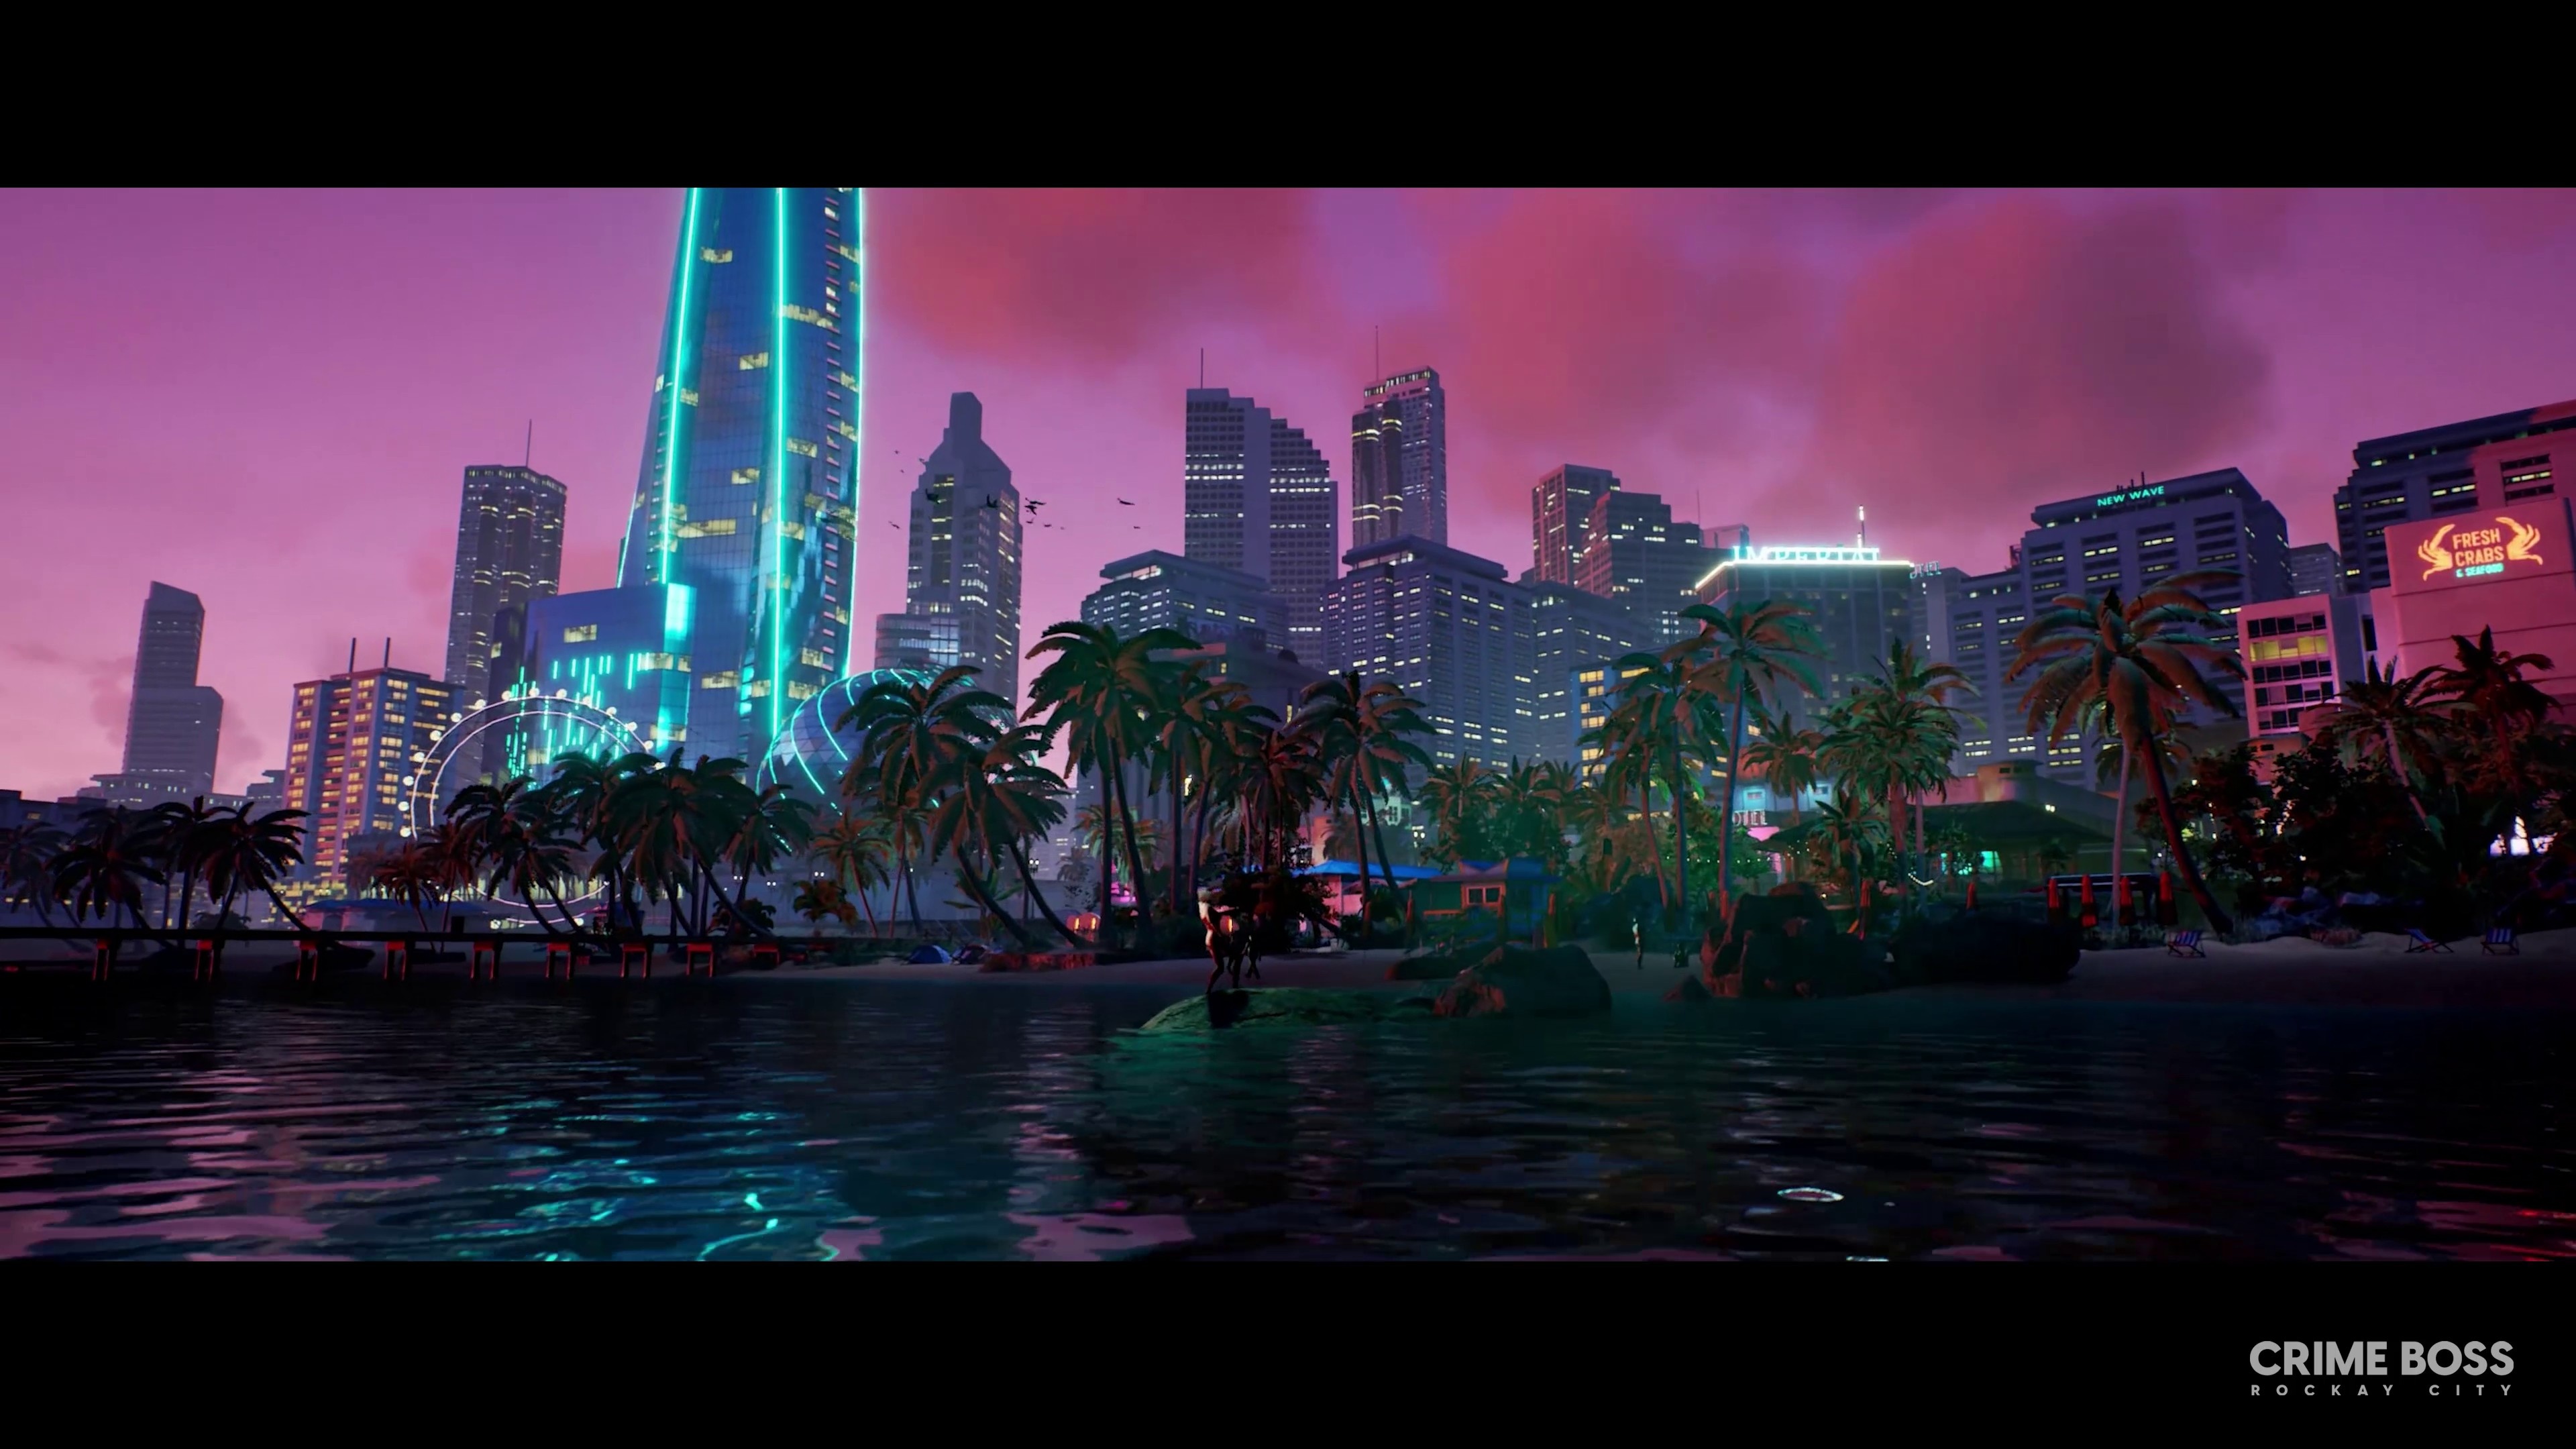 (Rockay City is clearly visually inspired by 90s Miami.)